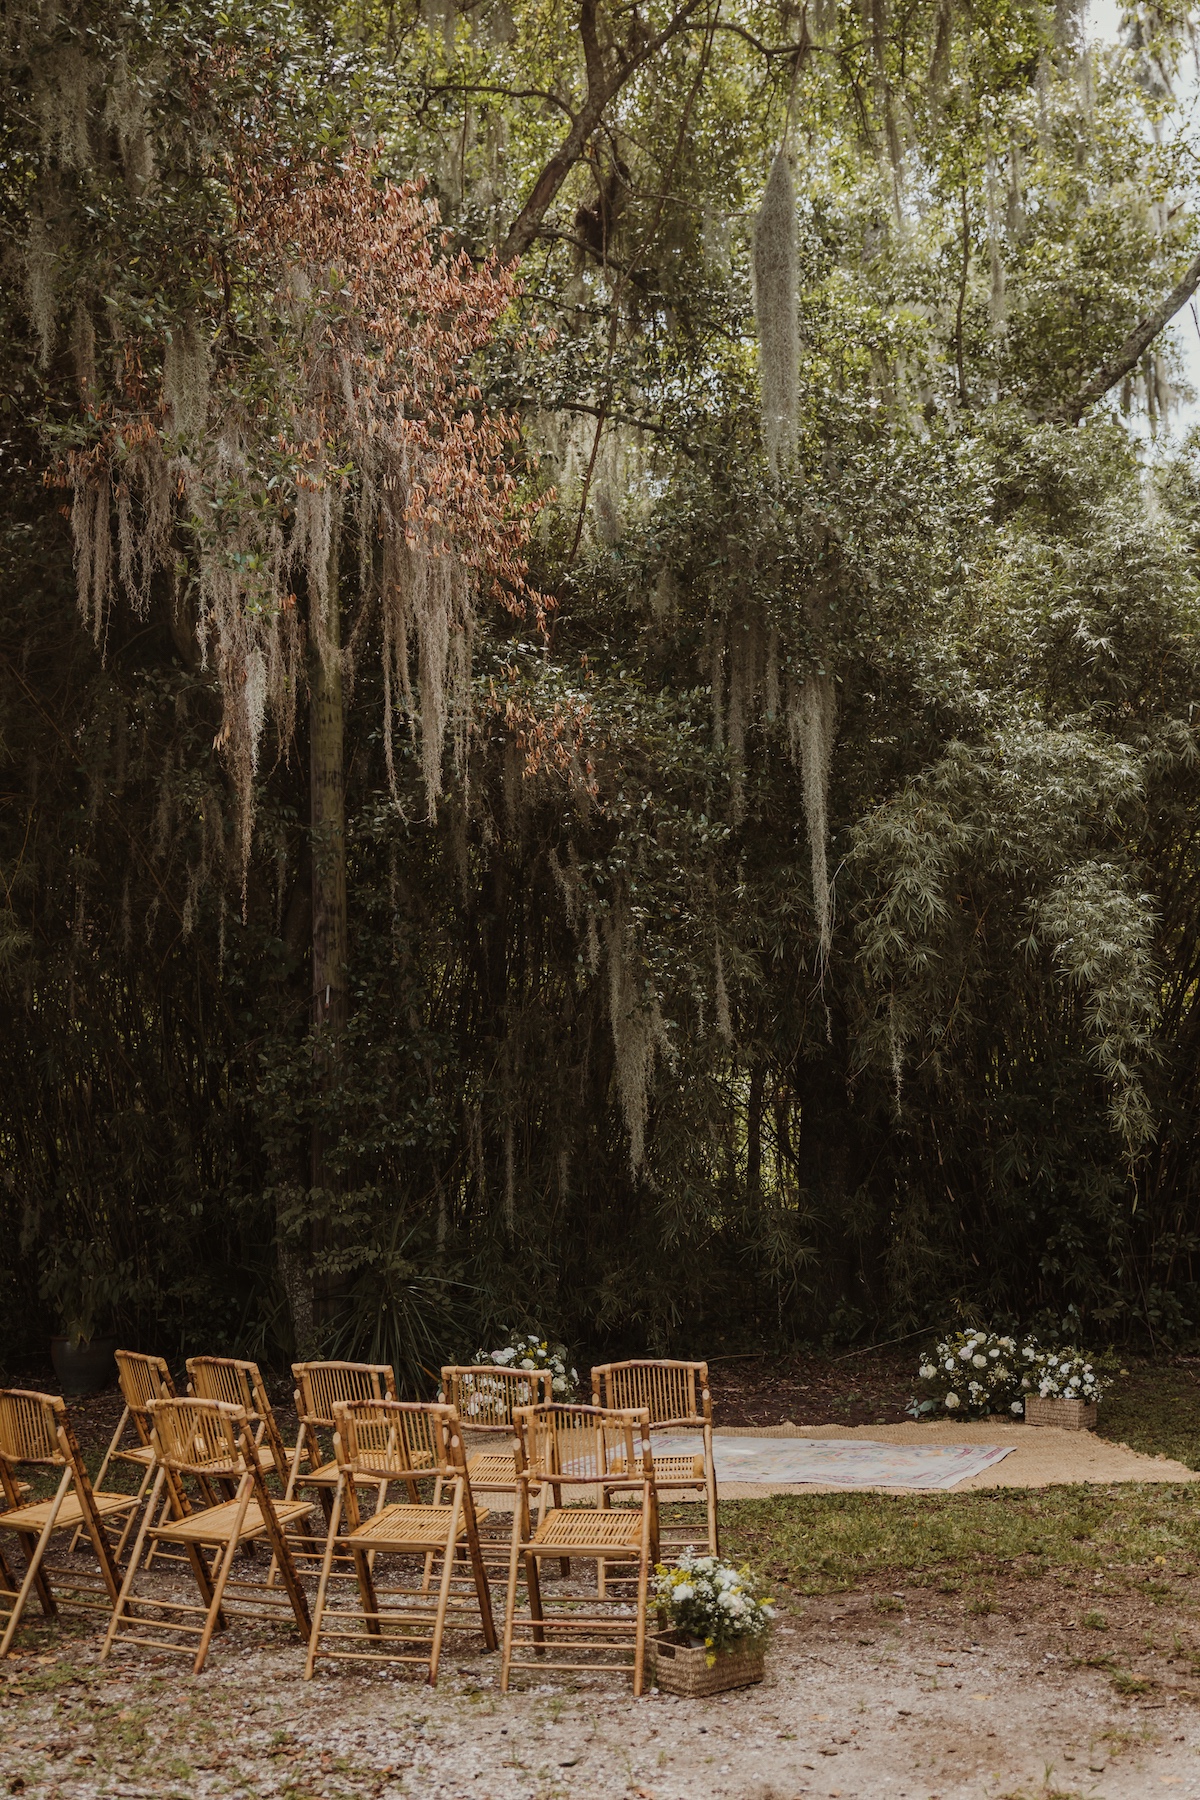 A Quirky Take On A Southern Wedding With A Red Solo Cup Installation That You Have To See